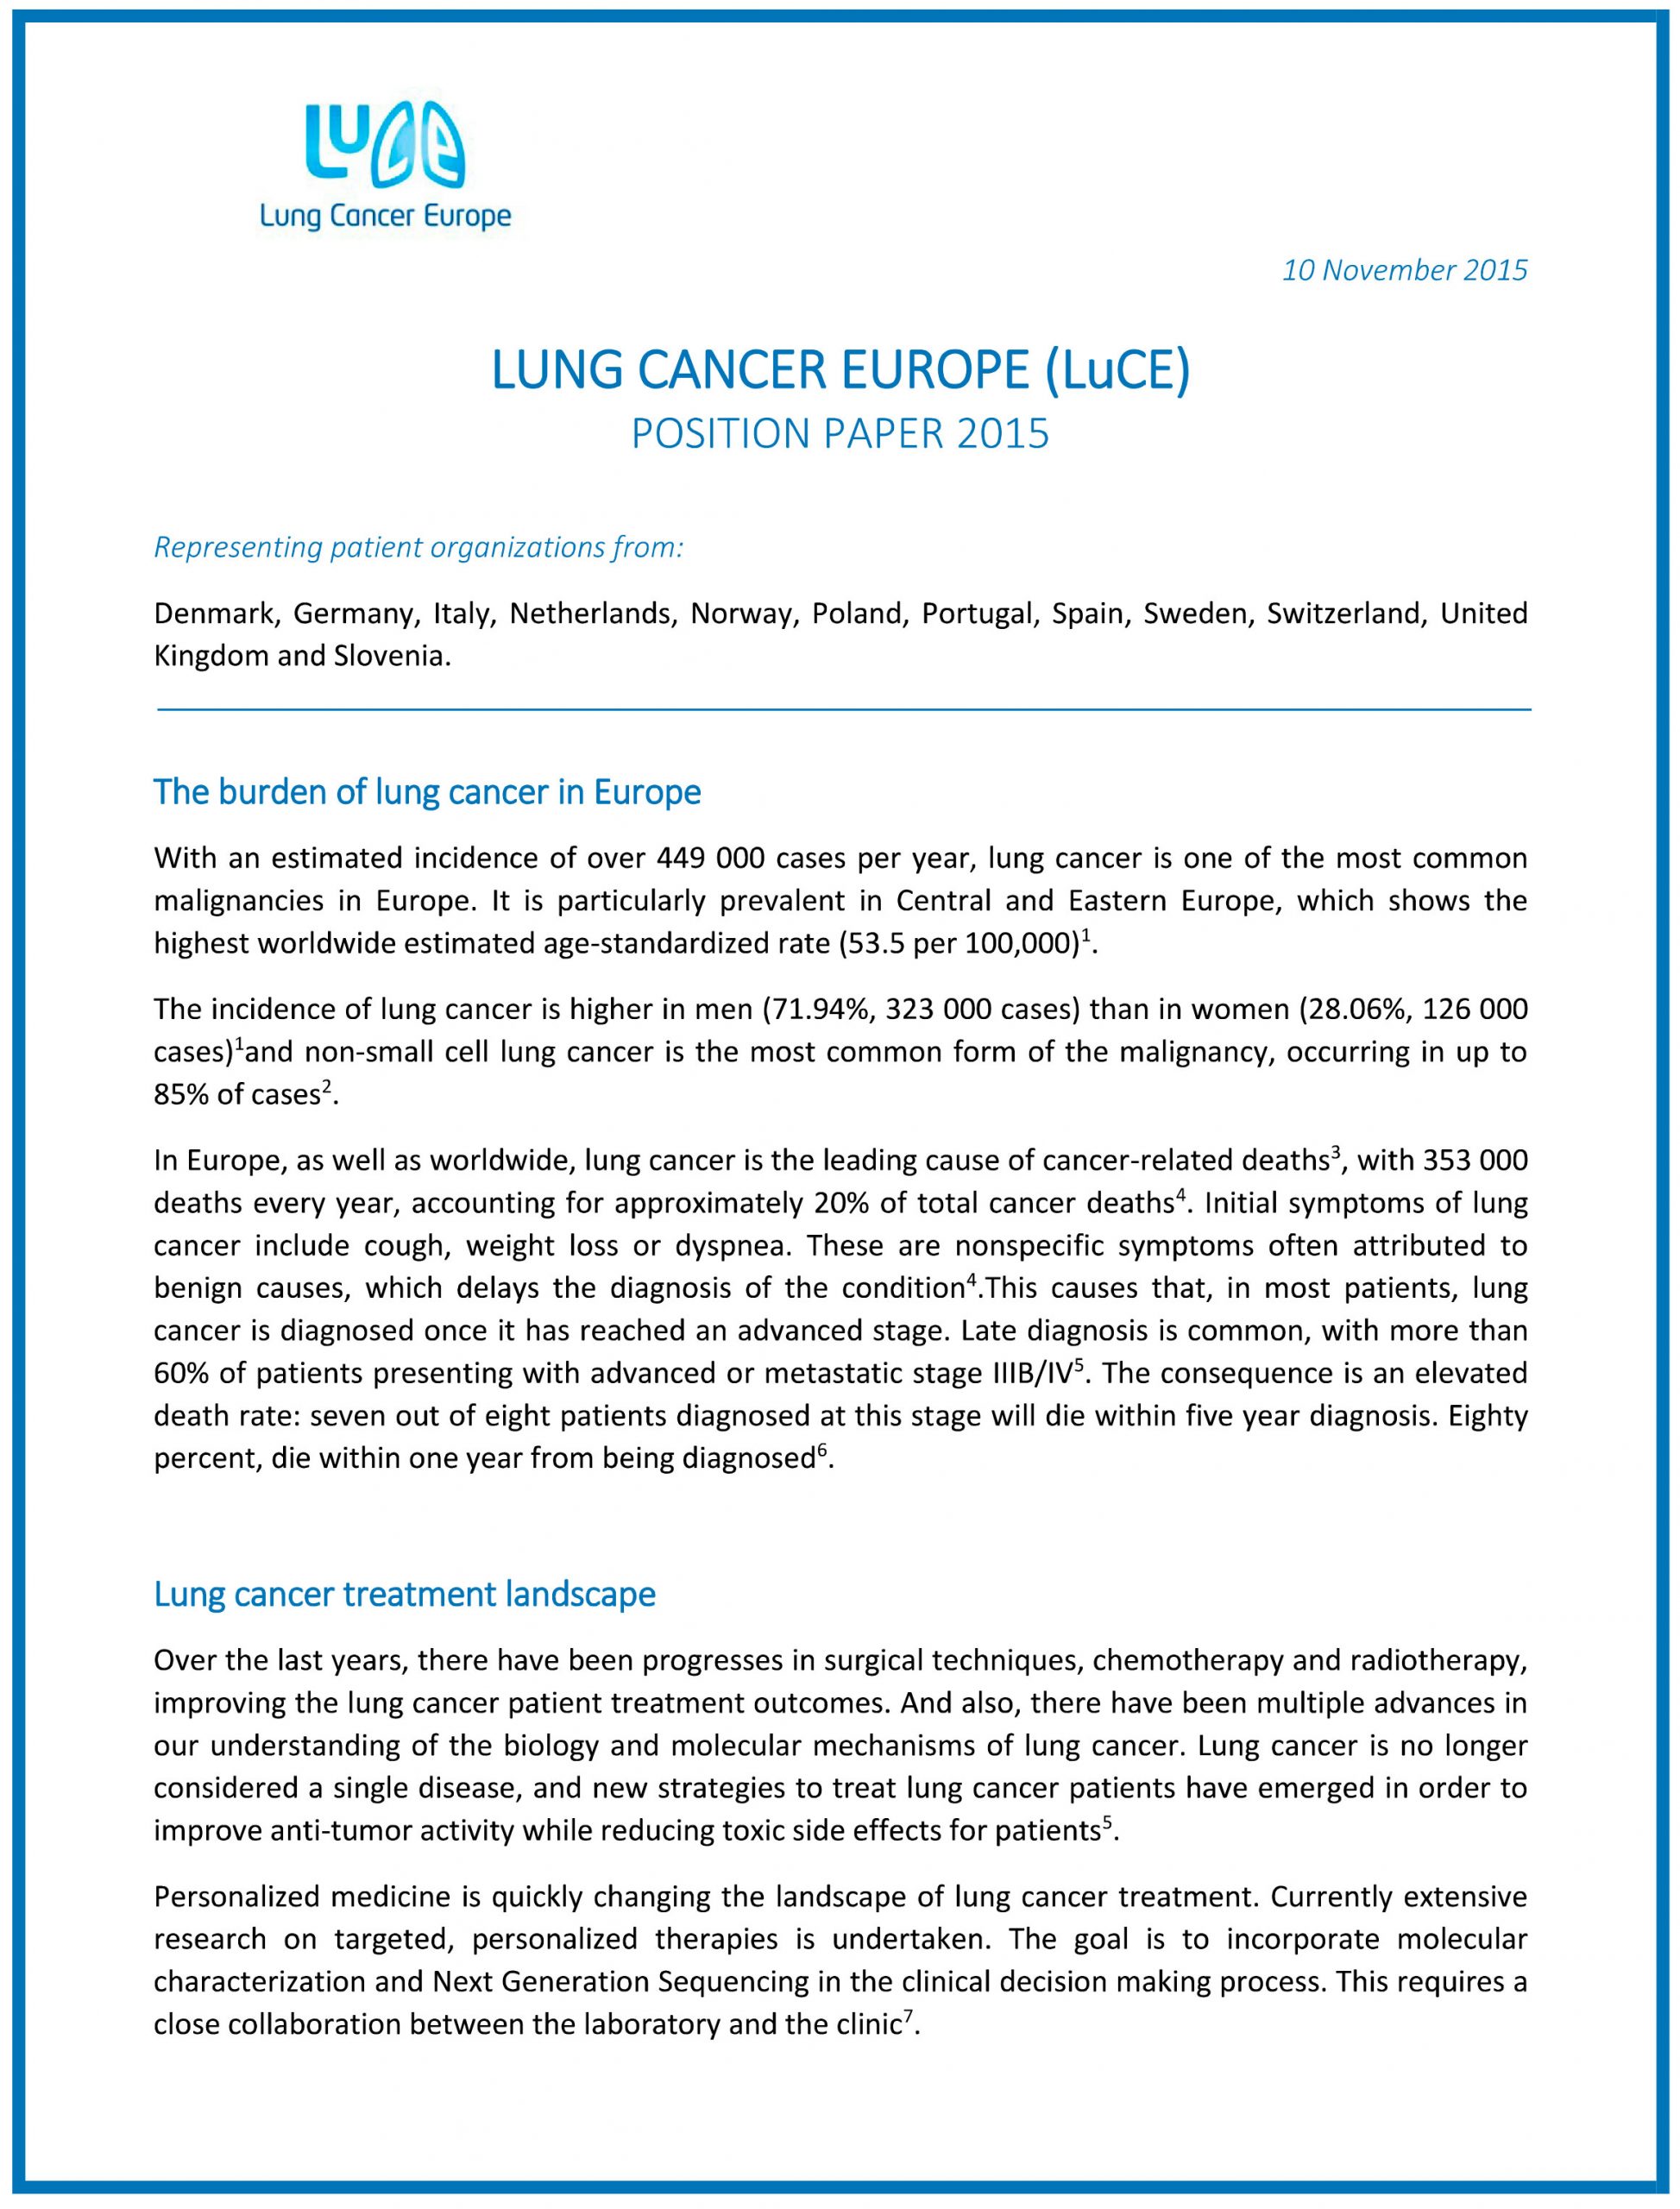 Lung Cancer Europe (Luce) Position Paper 2015